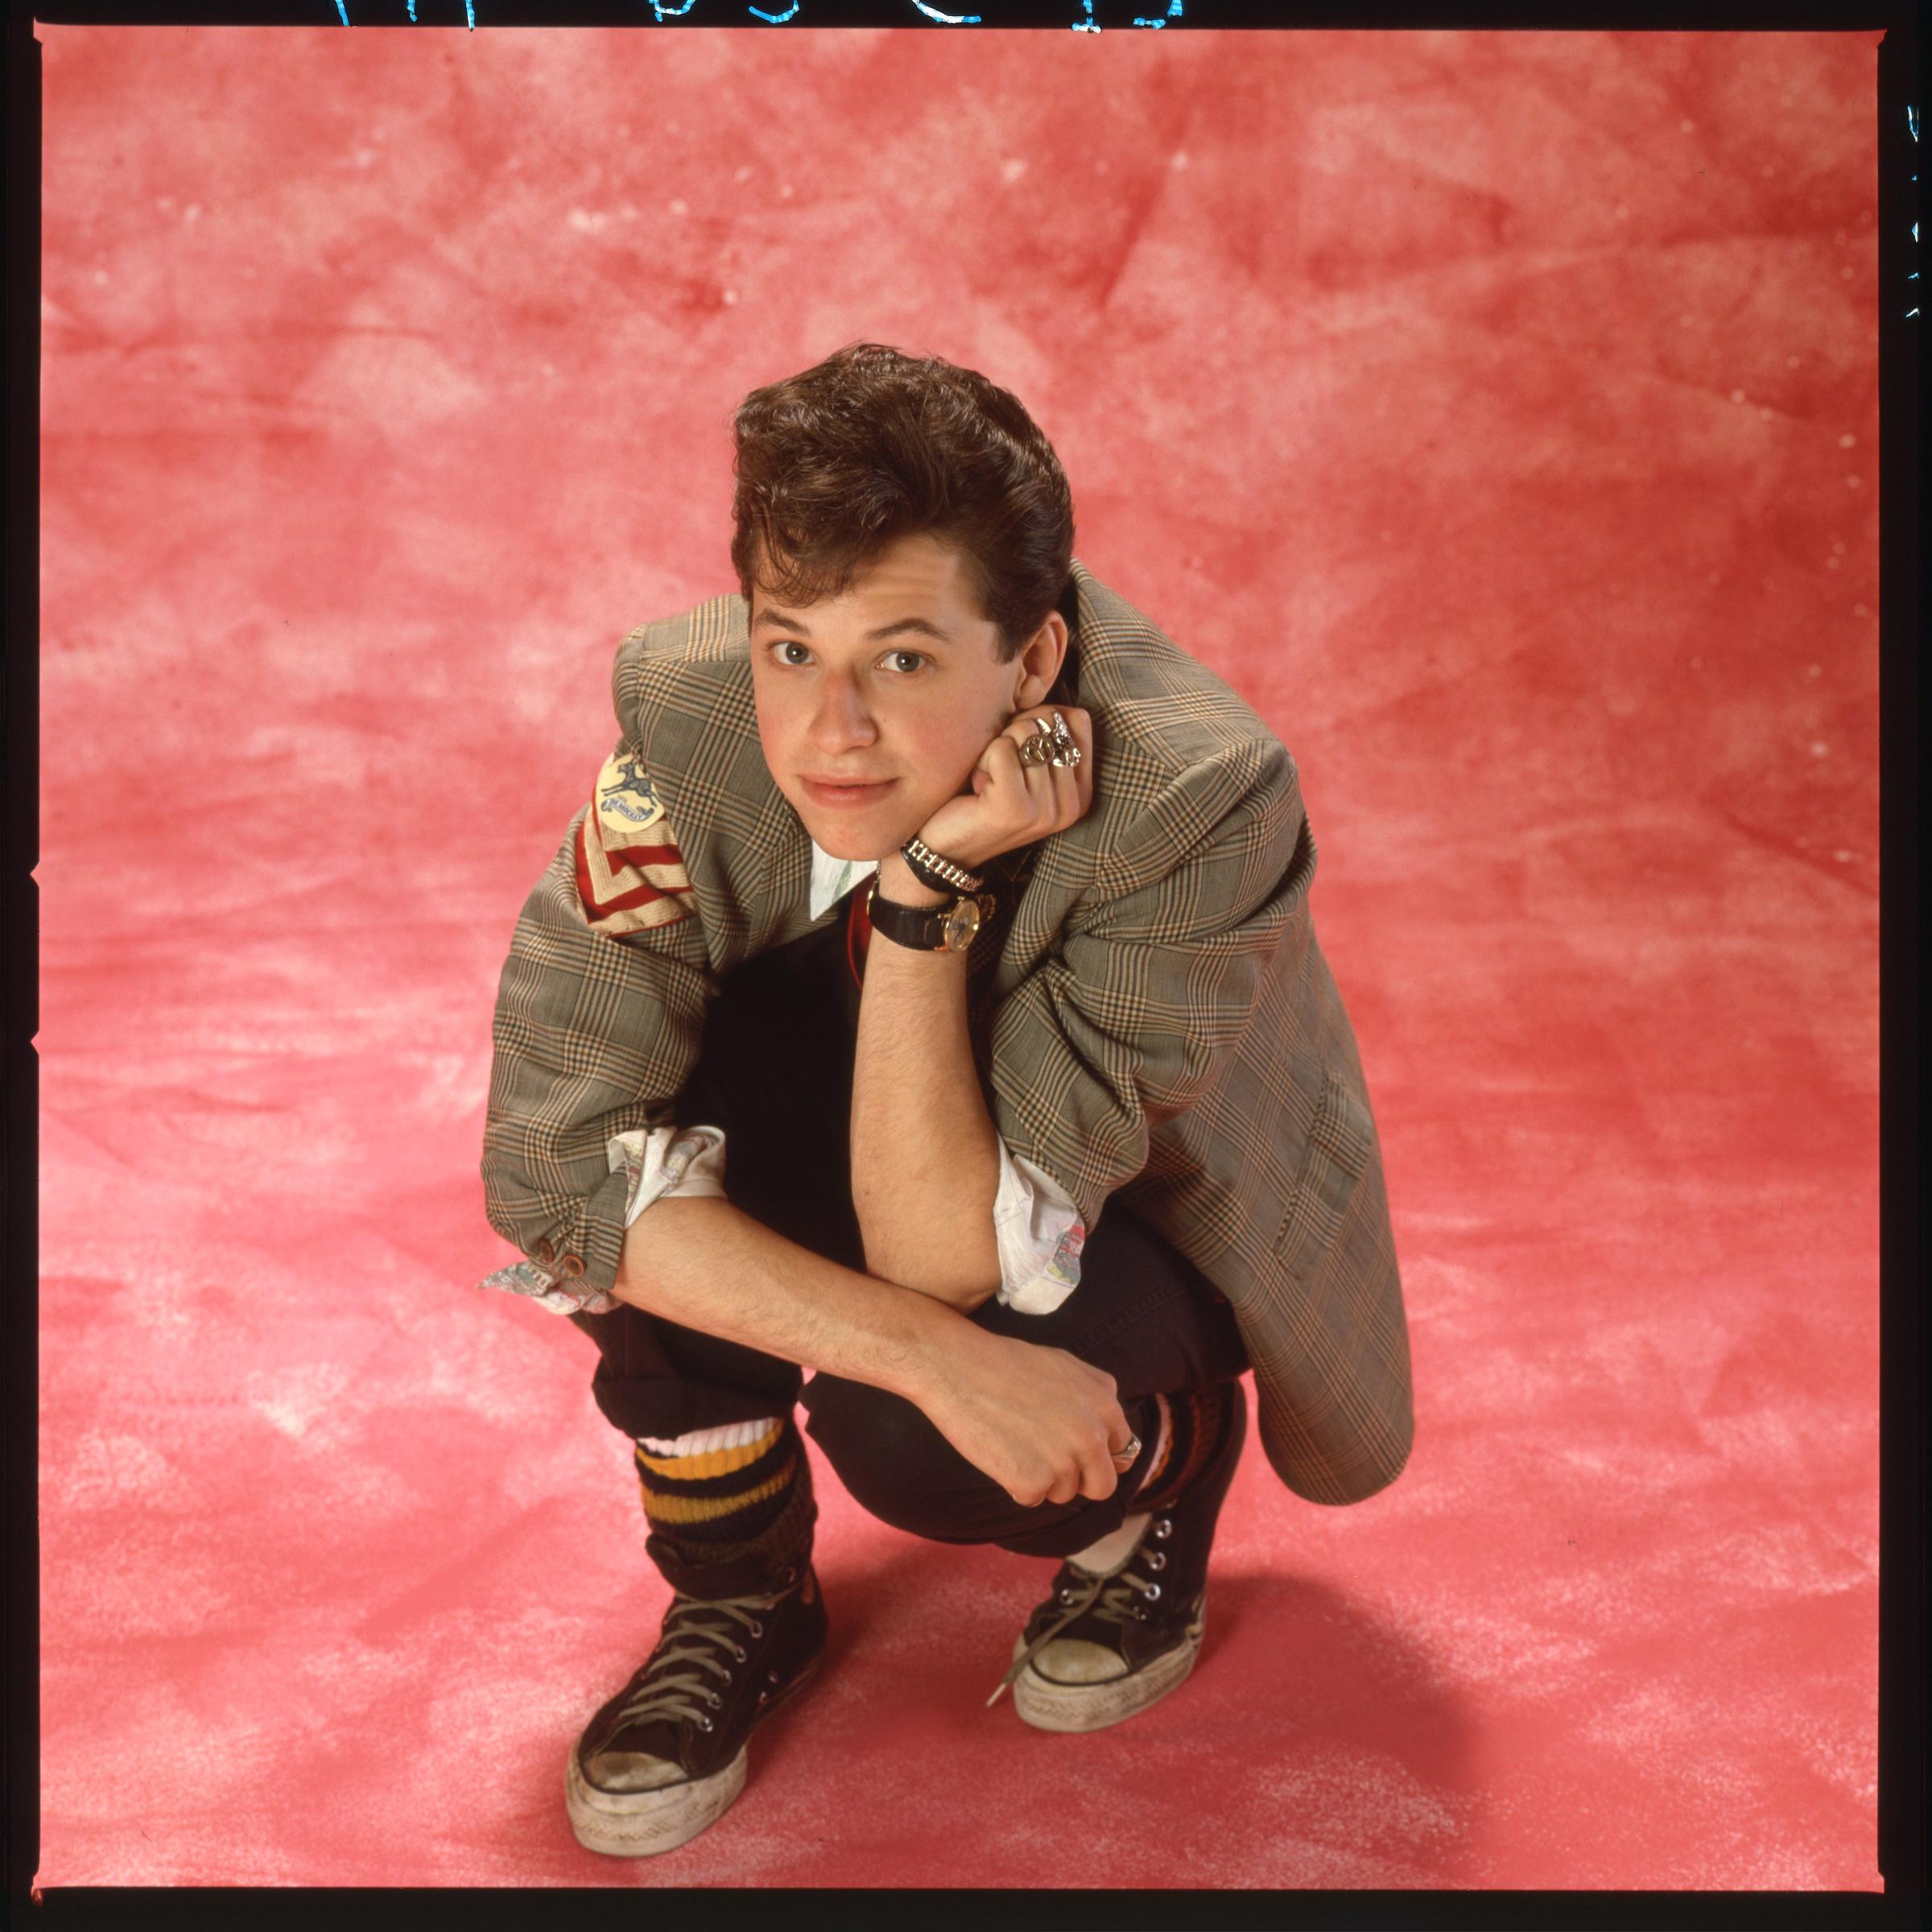 Jon Cryer as Duckie Dale in "Pretty in Pink" in 1986 | Source: Getty Images